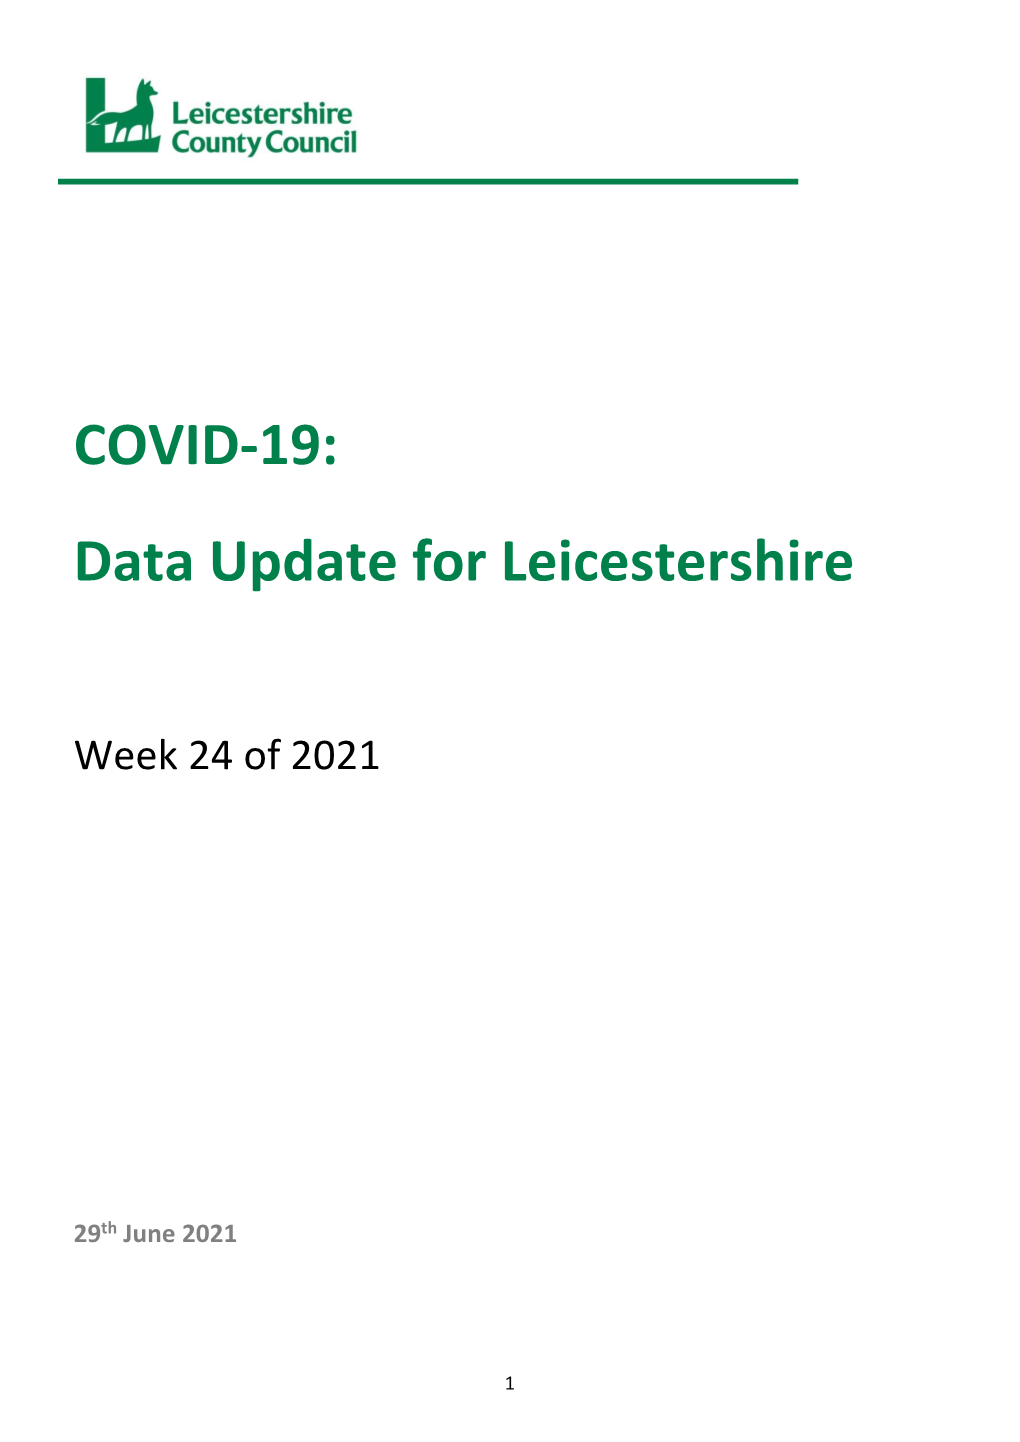 COVID-19: Data Update for Leicestershire (Week 24 of 2021)